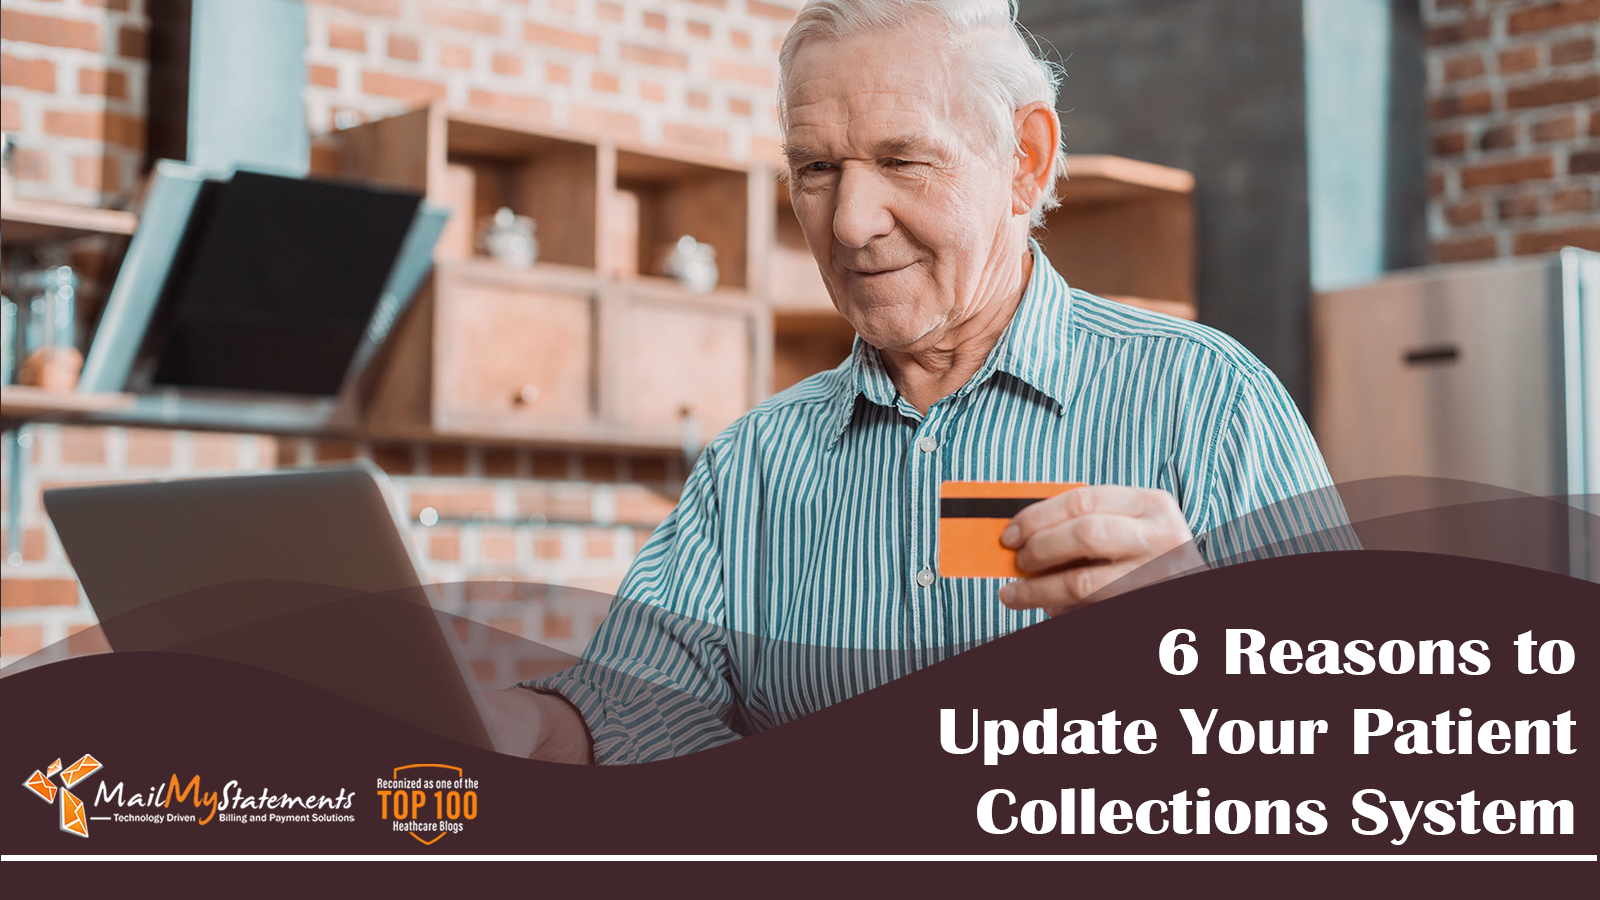 6 Reasons to Update Your Patient Collections System2